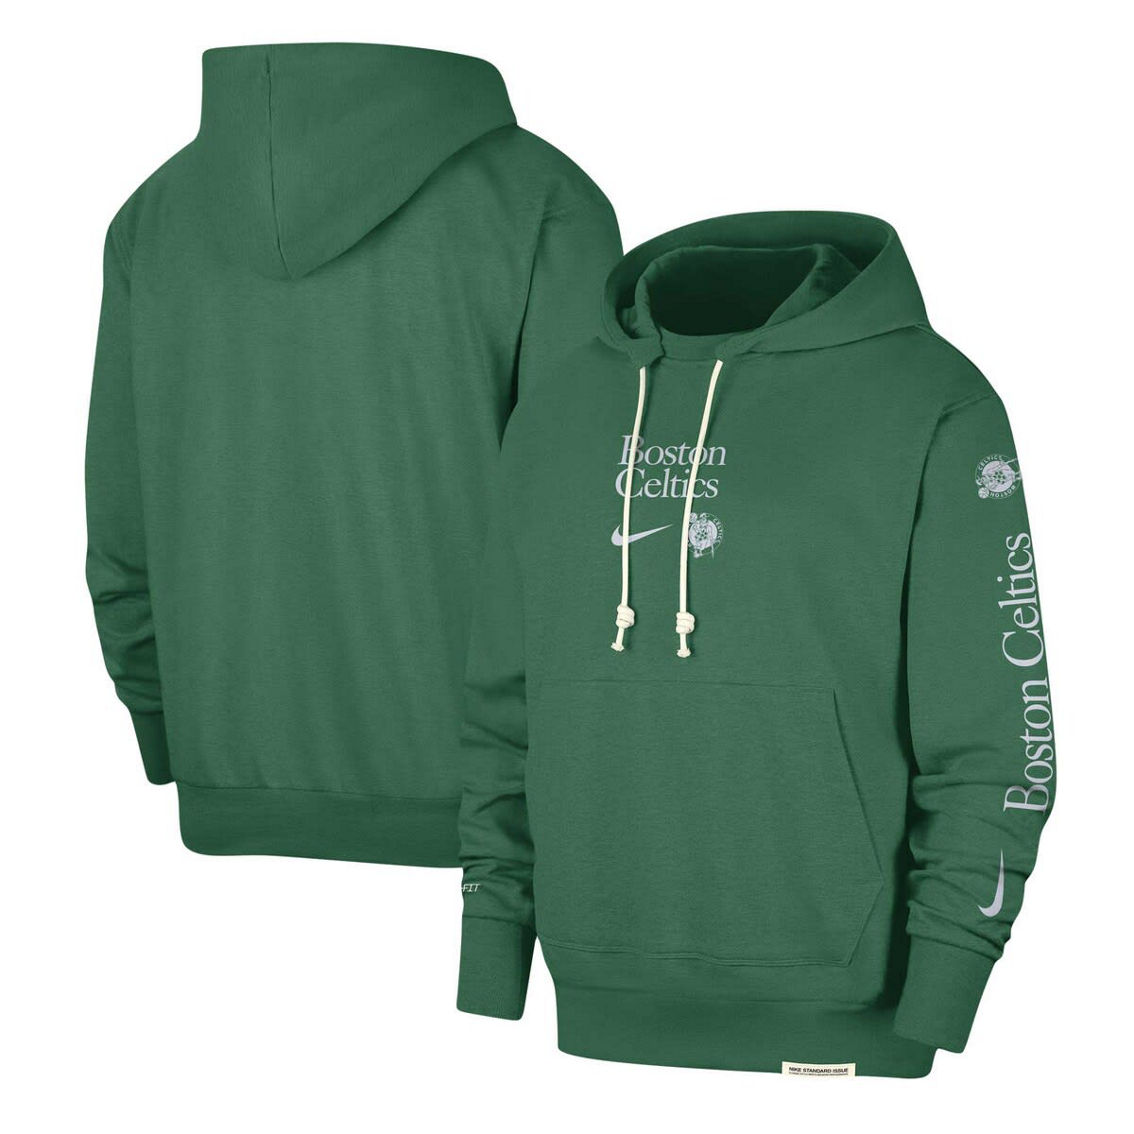 Nike Men's Kelly Green Boston Celtics Authentic Performance Pullover Hoodie - Image 2 of 4